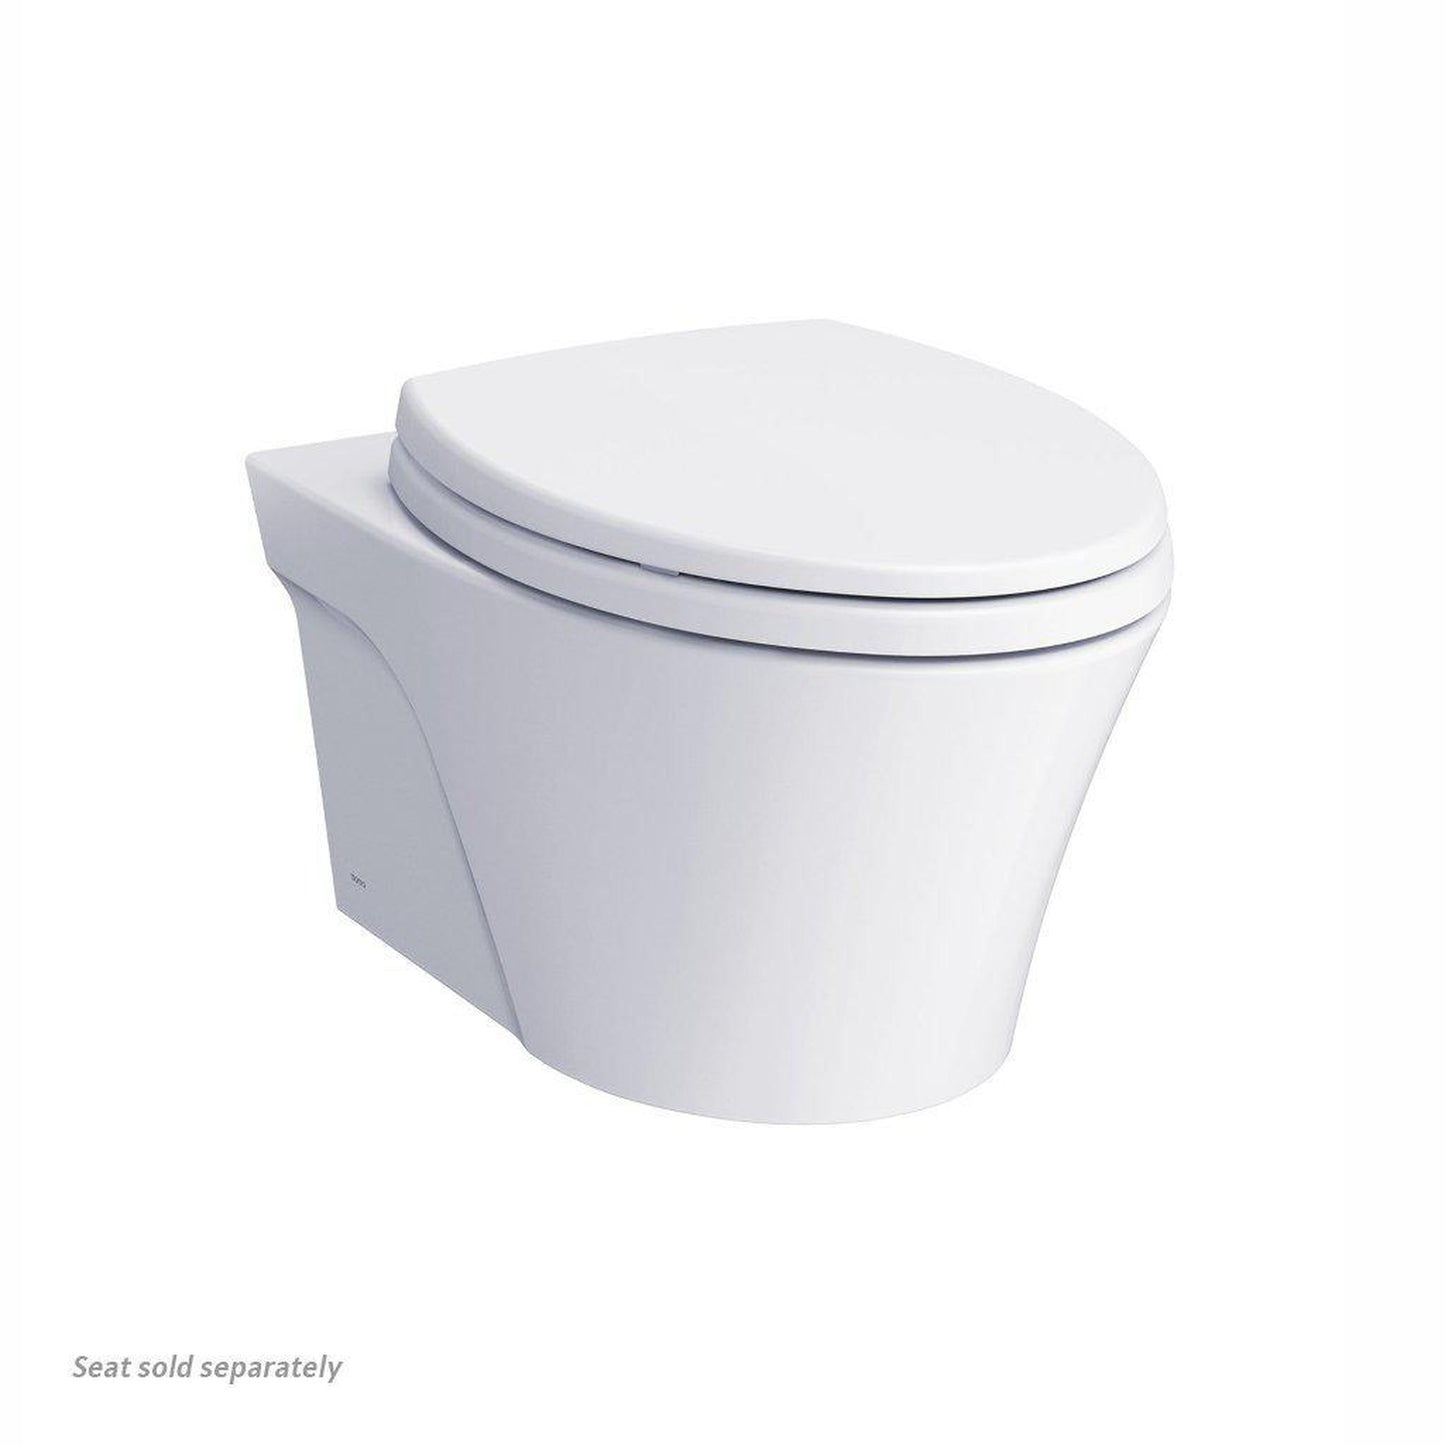 TOTO AP WASHLET+ C2 Wall-Hung 1.28 GPF & 0.9 GPF Dual-Flush Elongated Toilet With Duofit In-Wall Tank Unit